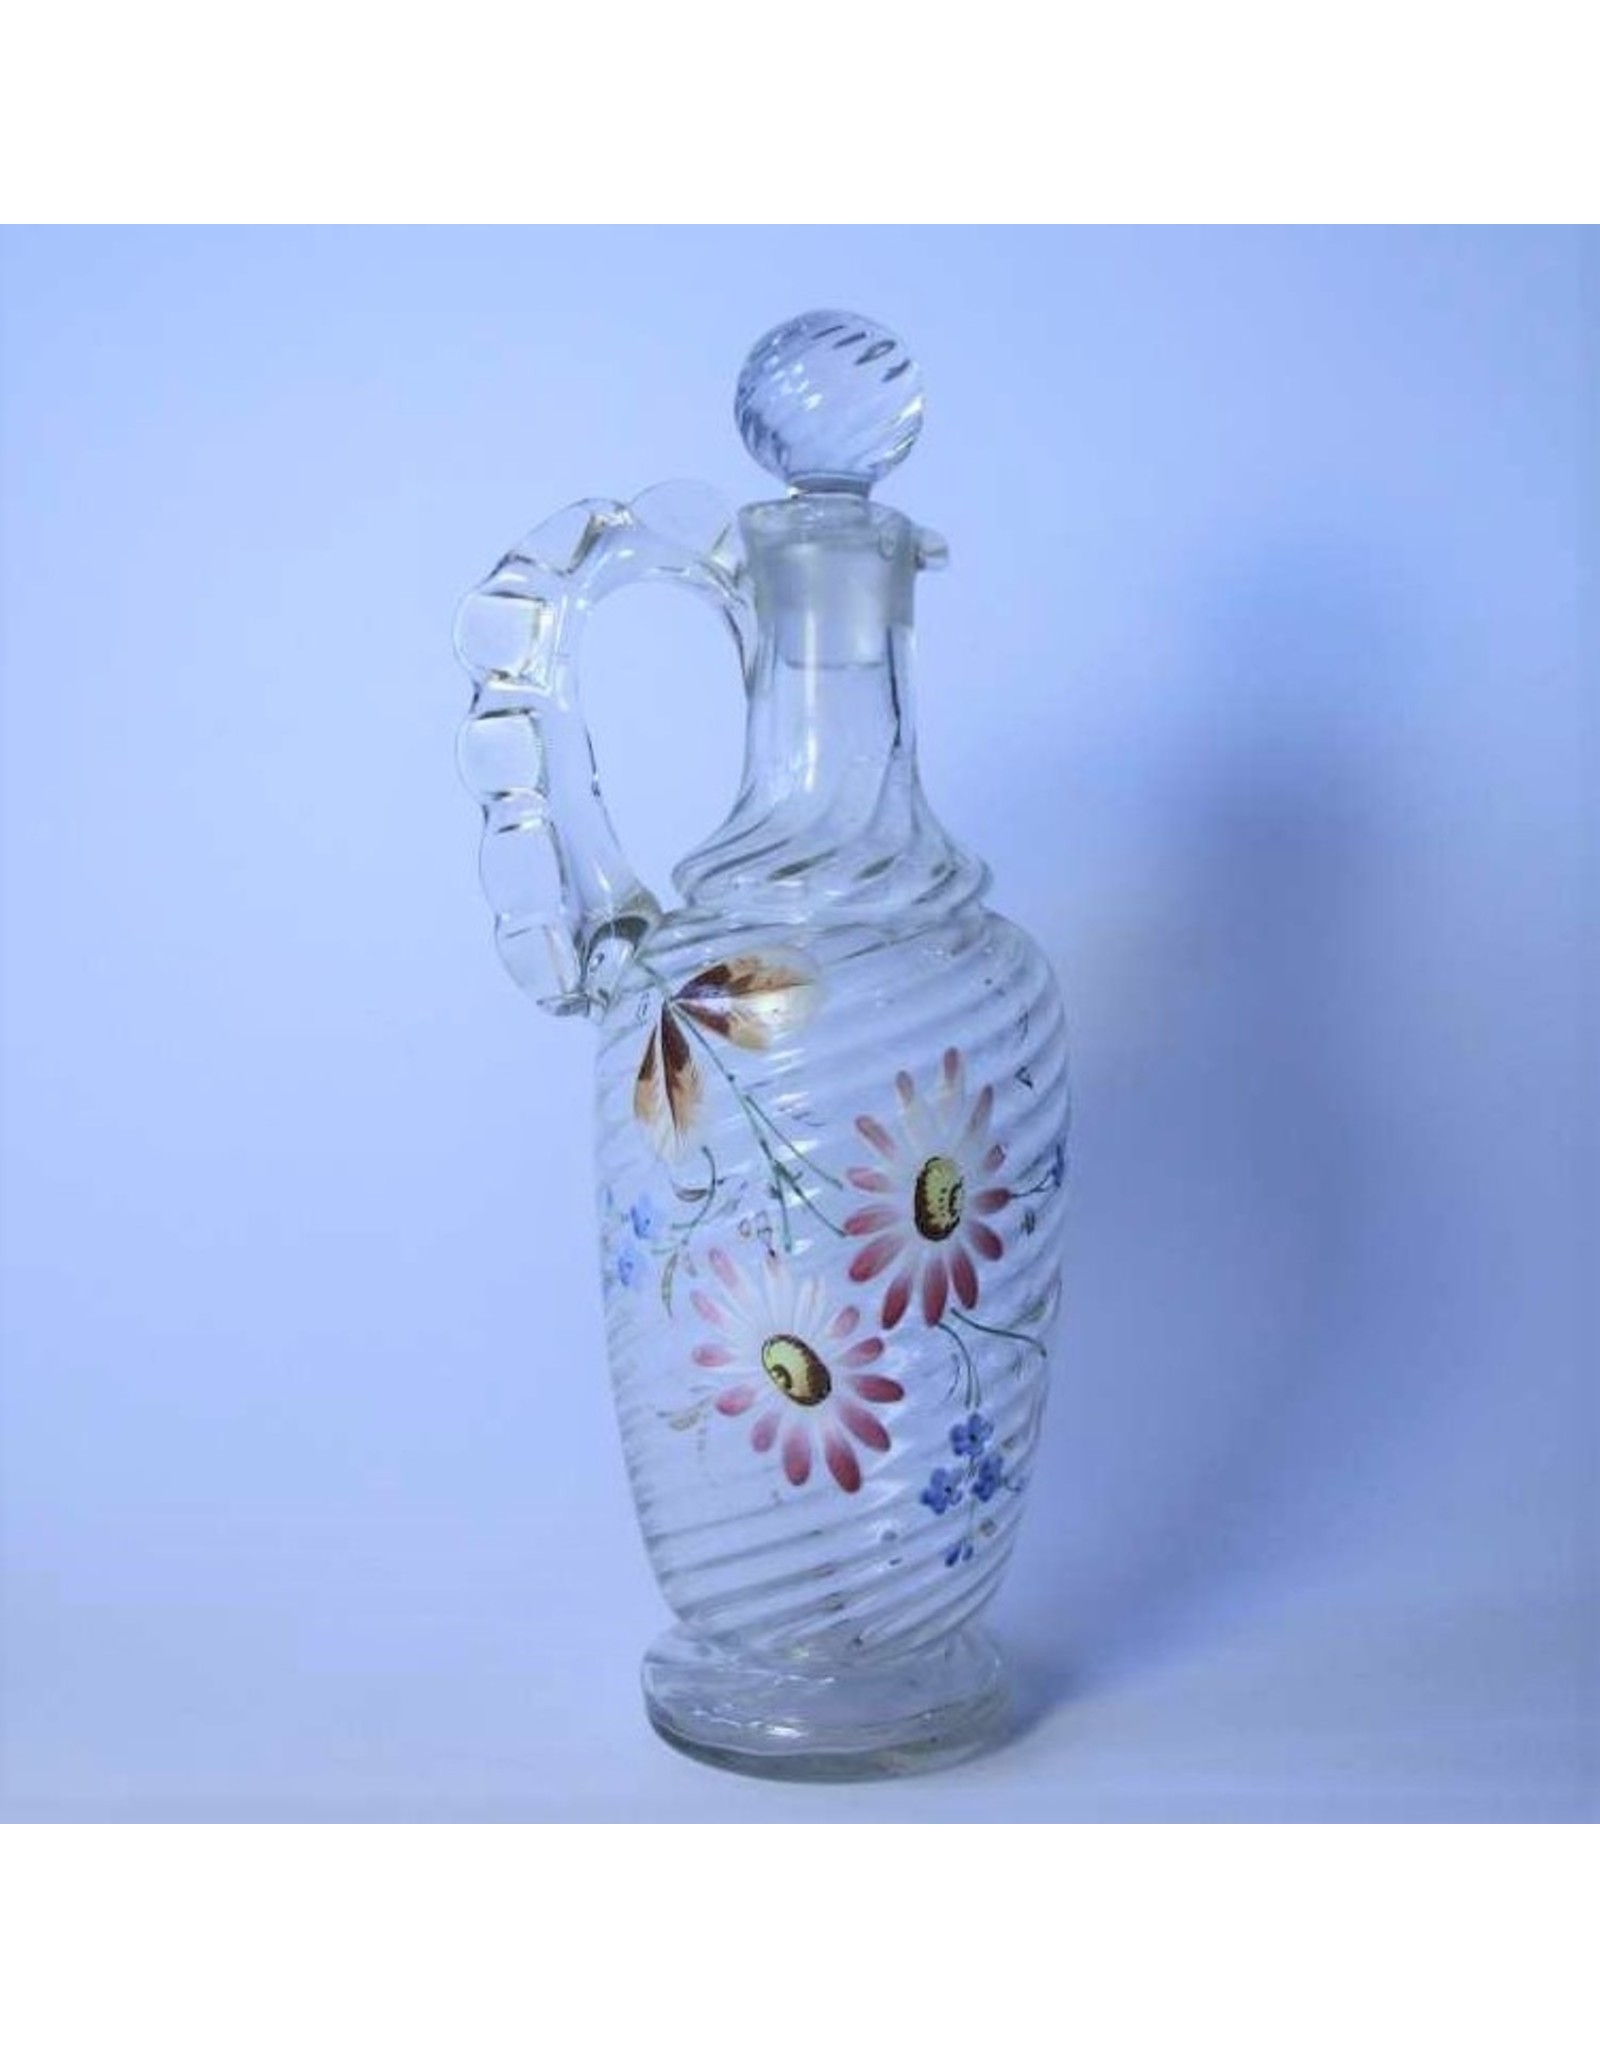 Decanter - glass, hand blow, hand painted flowers